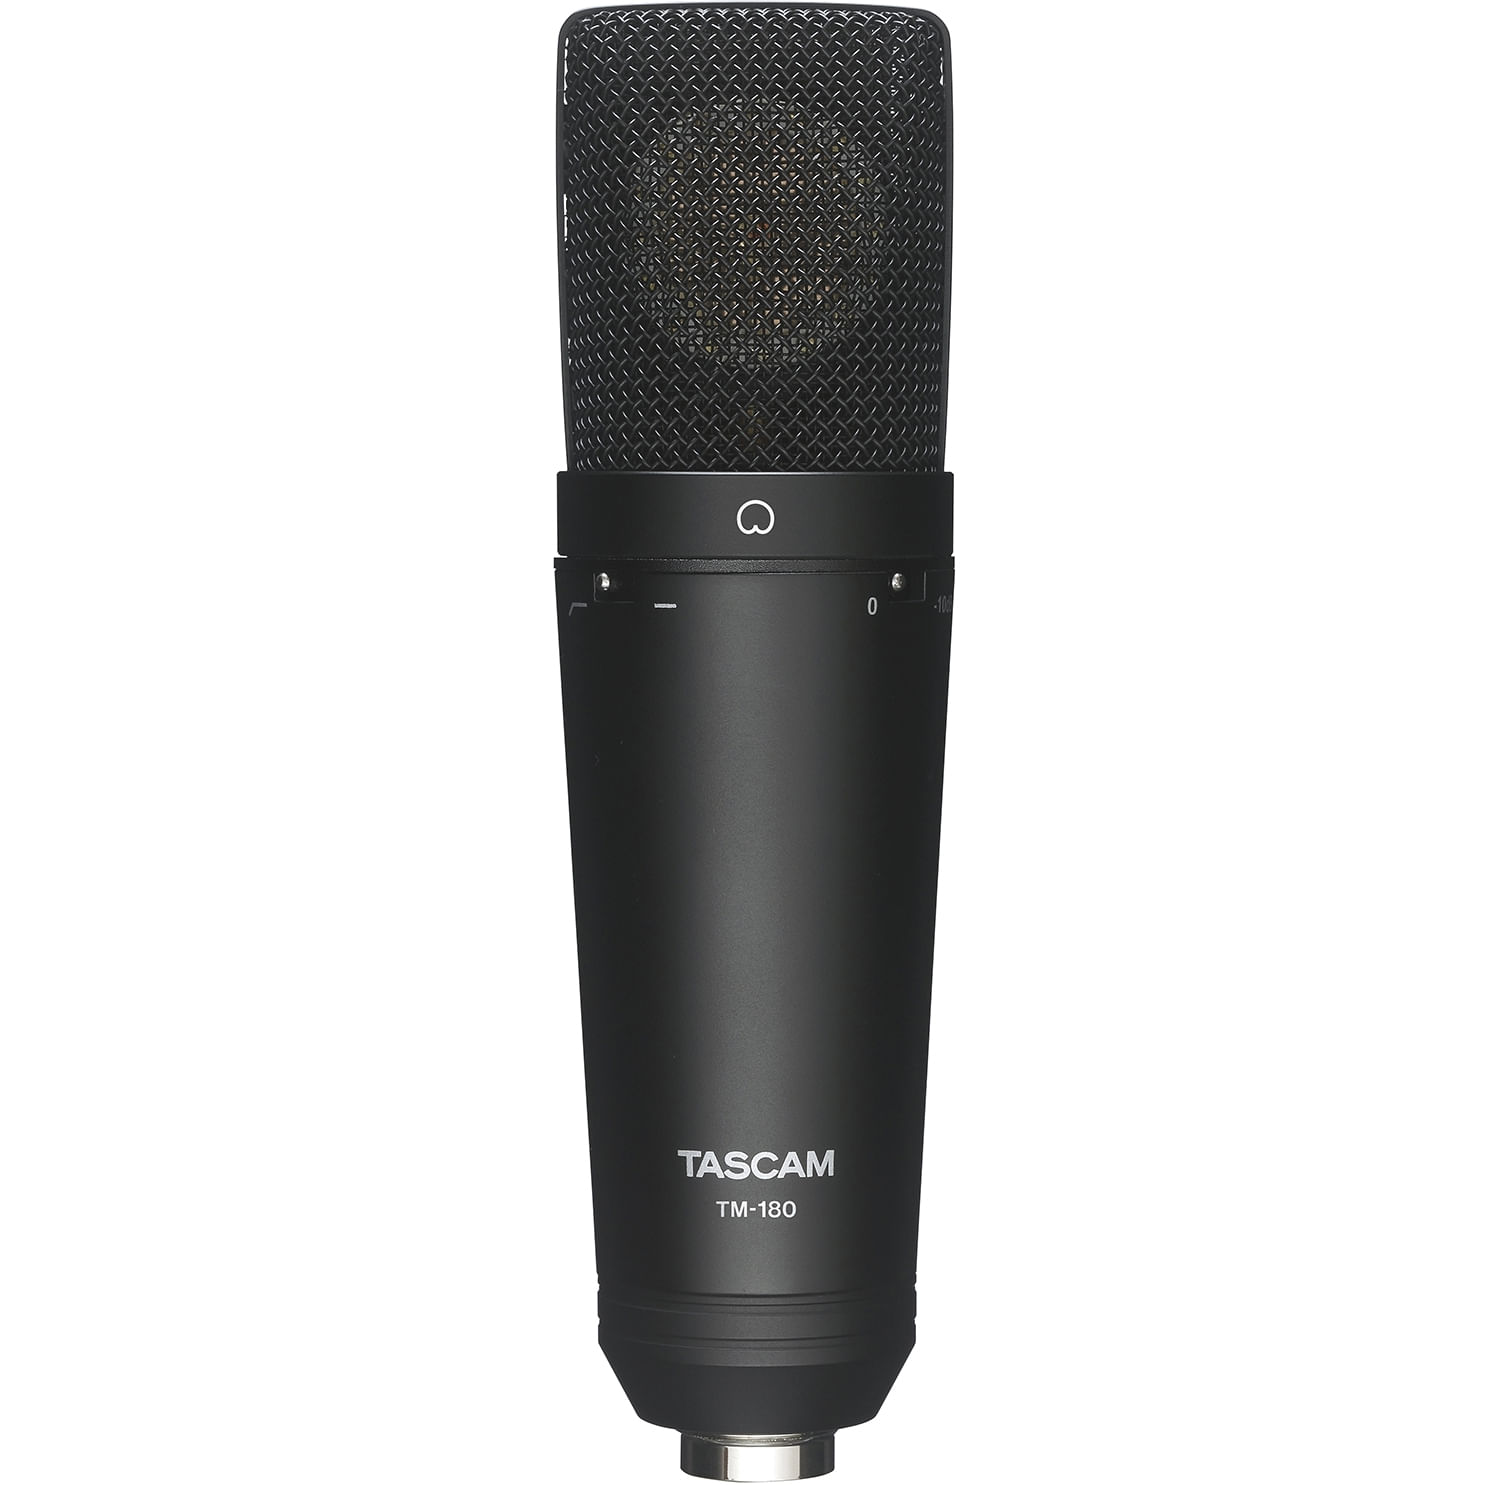 View larger image of Tascam TM-180 Studio Condenser Microphone